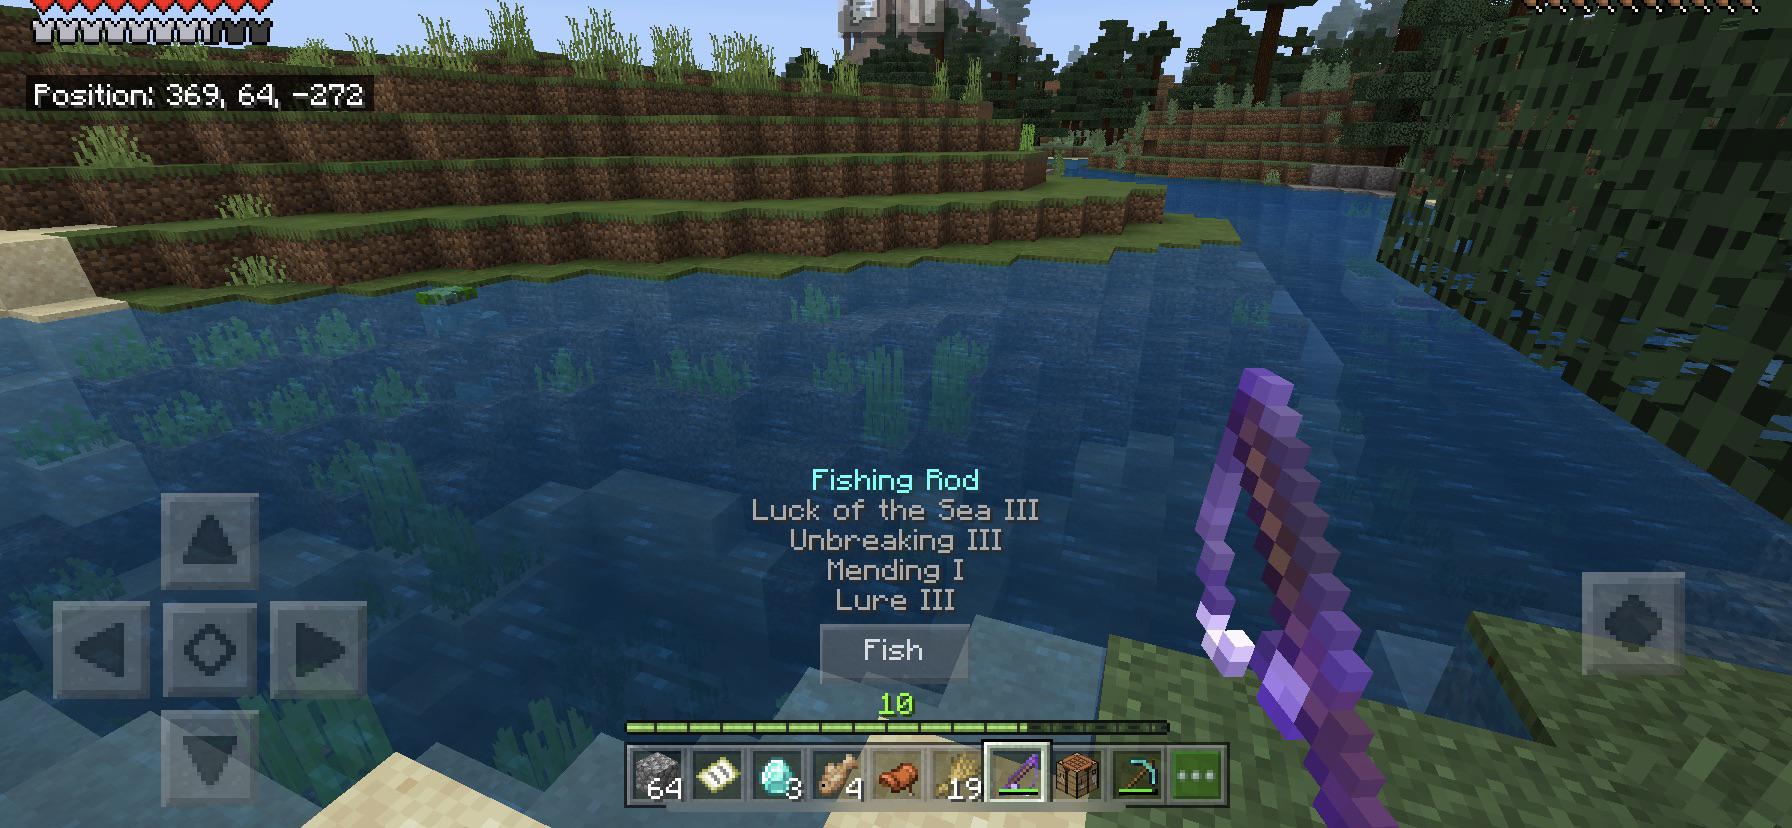 What is Fishing Rod in Minecraft